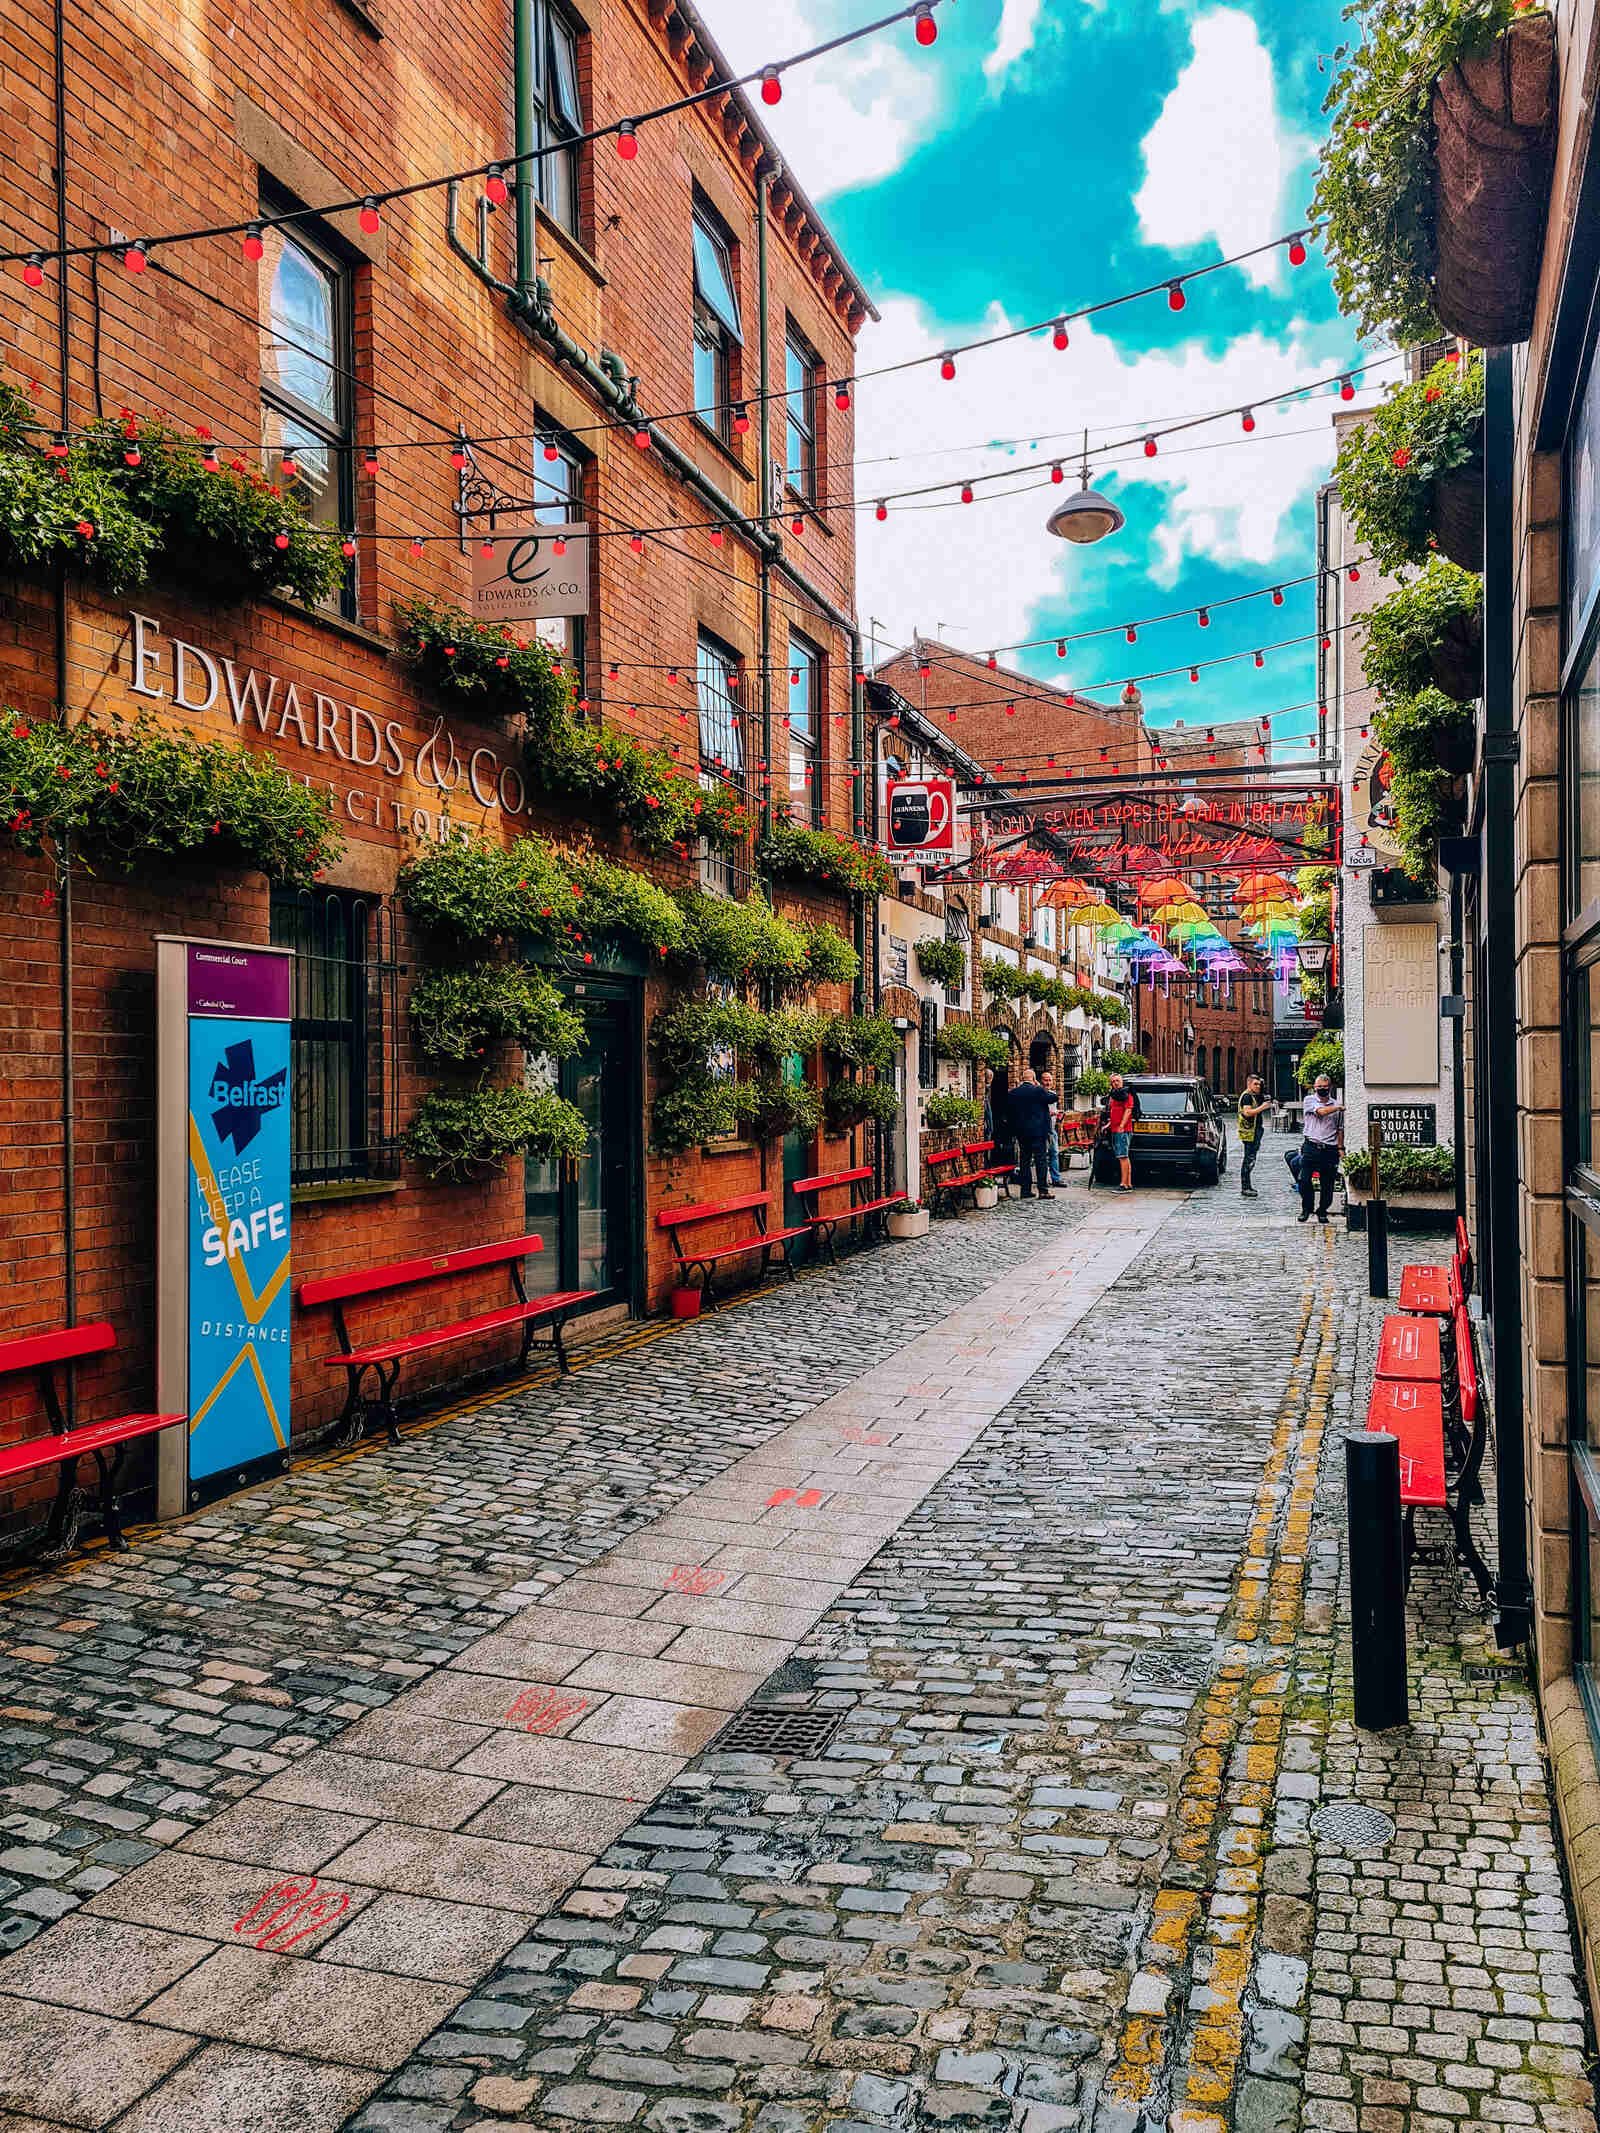 A cobbled street lined with red brick buildings and colourful lights and bunting hanging overhead in Belfast's cathedral quarter on a short break weekend in the UK